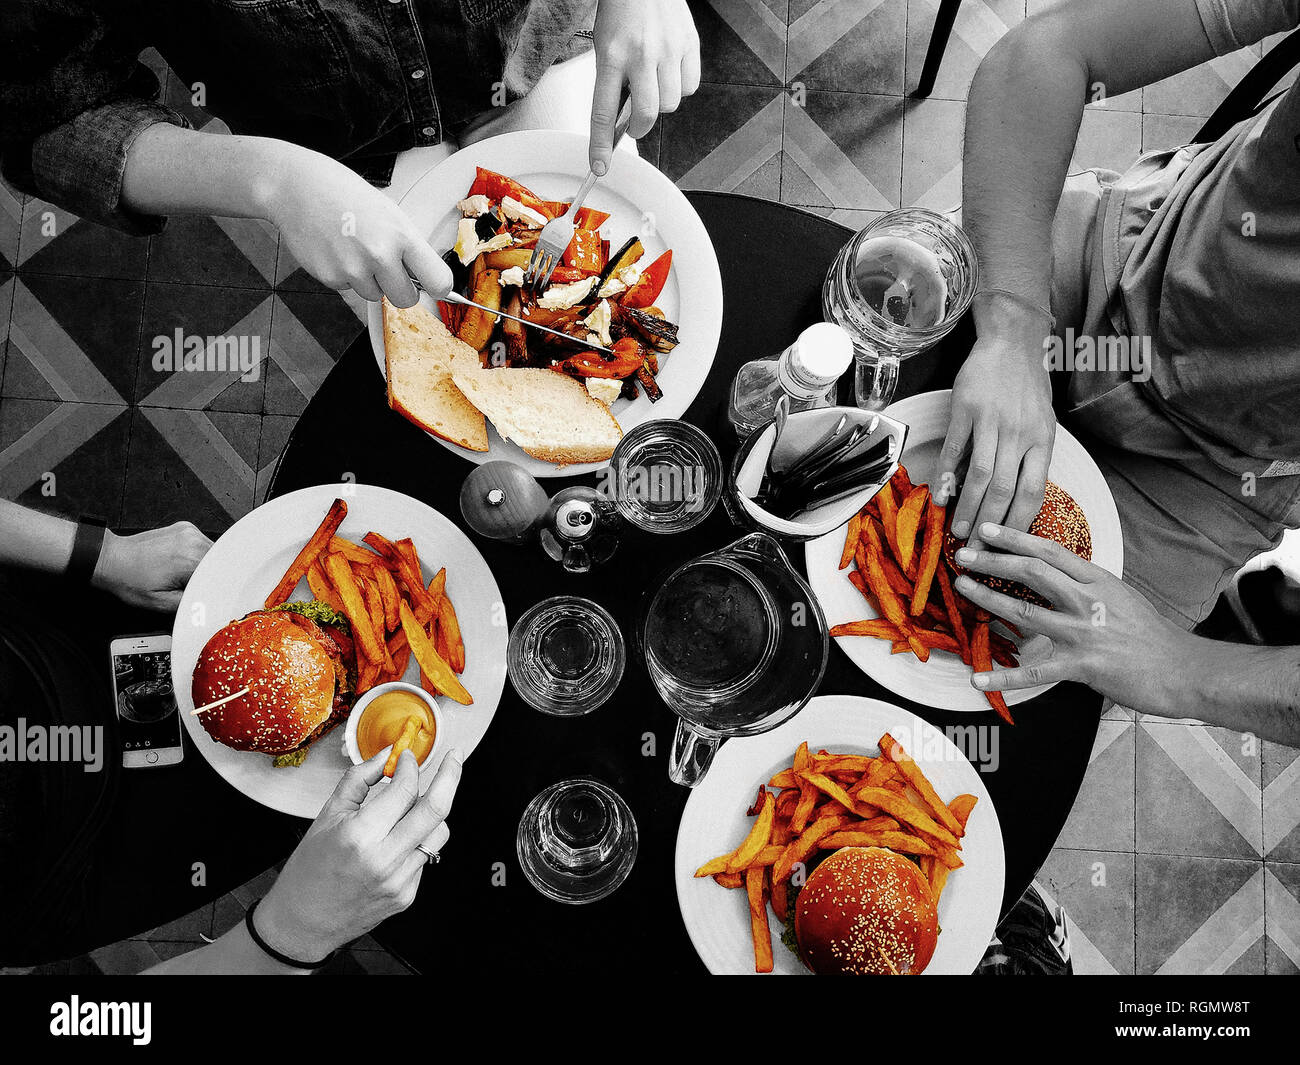 A monochrome photo with the food and meal in color. Top view of people dining on a table and holding food. Stock Photo